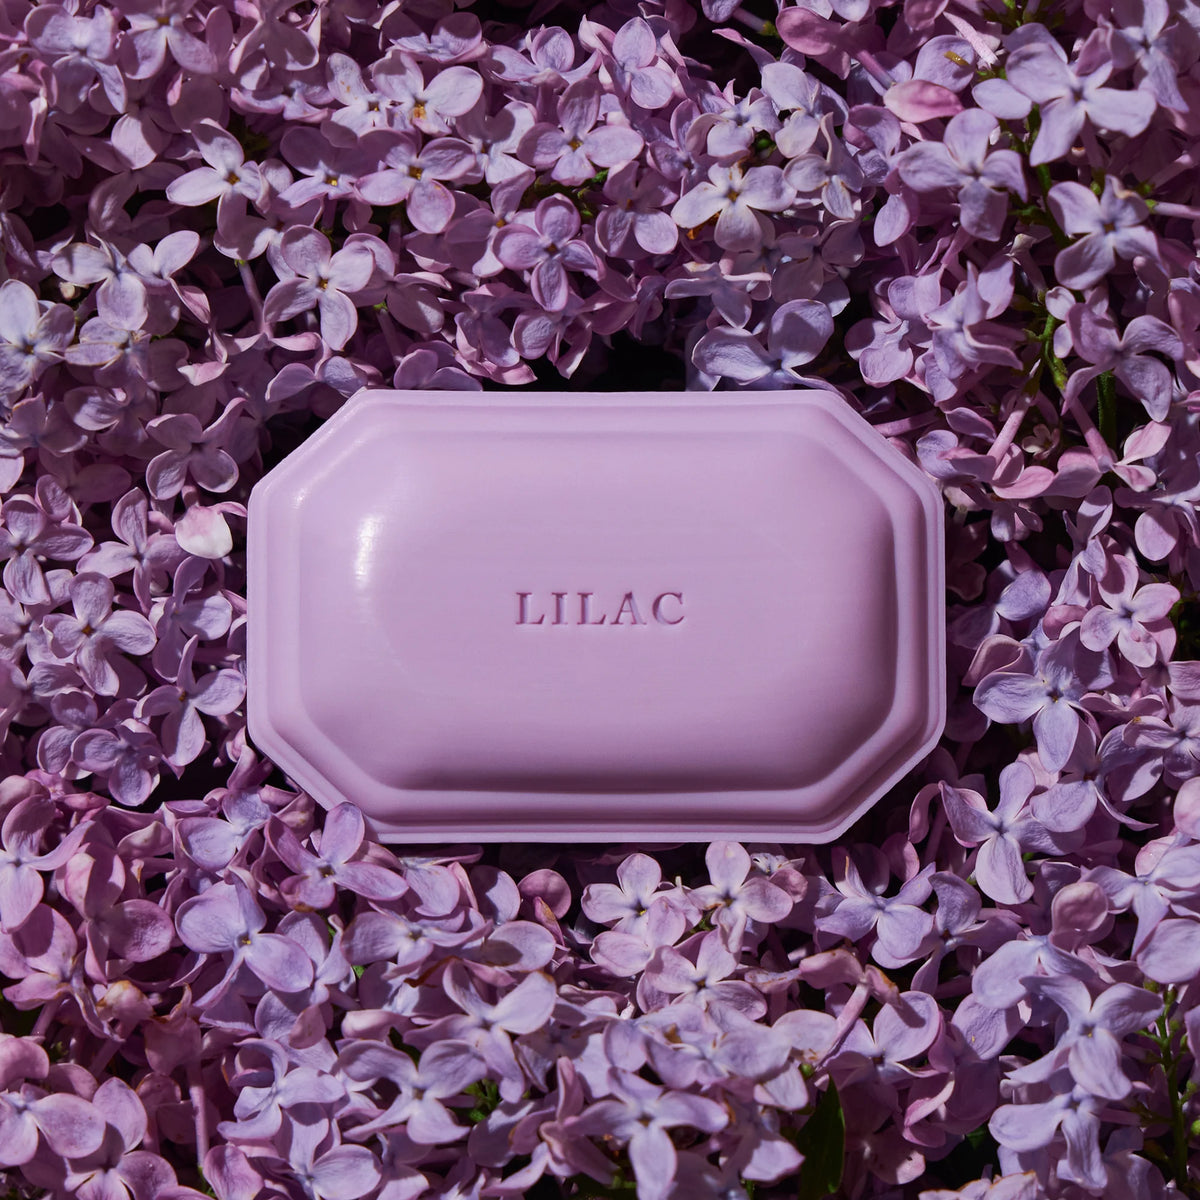 A lilac-colored, triple-milled soap bar labeled "Caswell - Massey Lilac Three Soap Set" nestled in a bed of fresh lilac flowers, creating a harmonious blend of colors and textures by Caswell Massey.